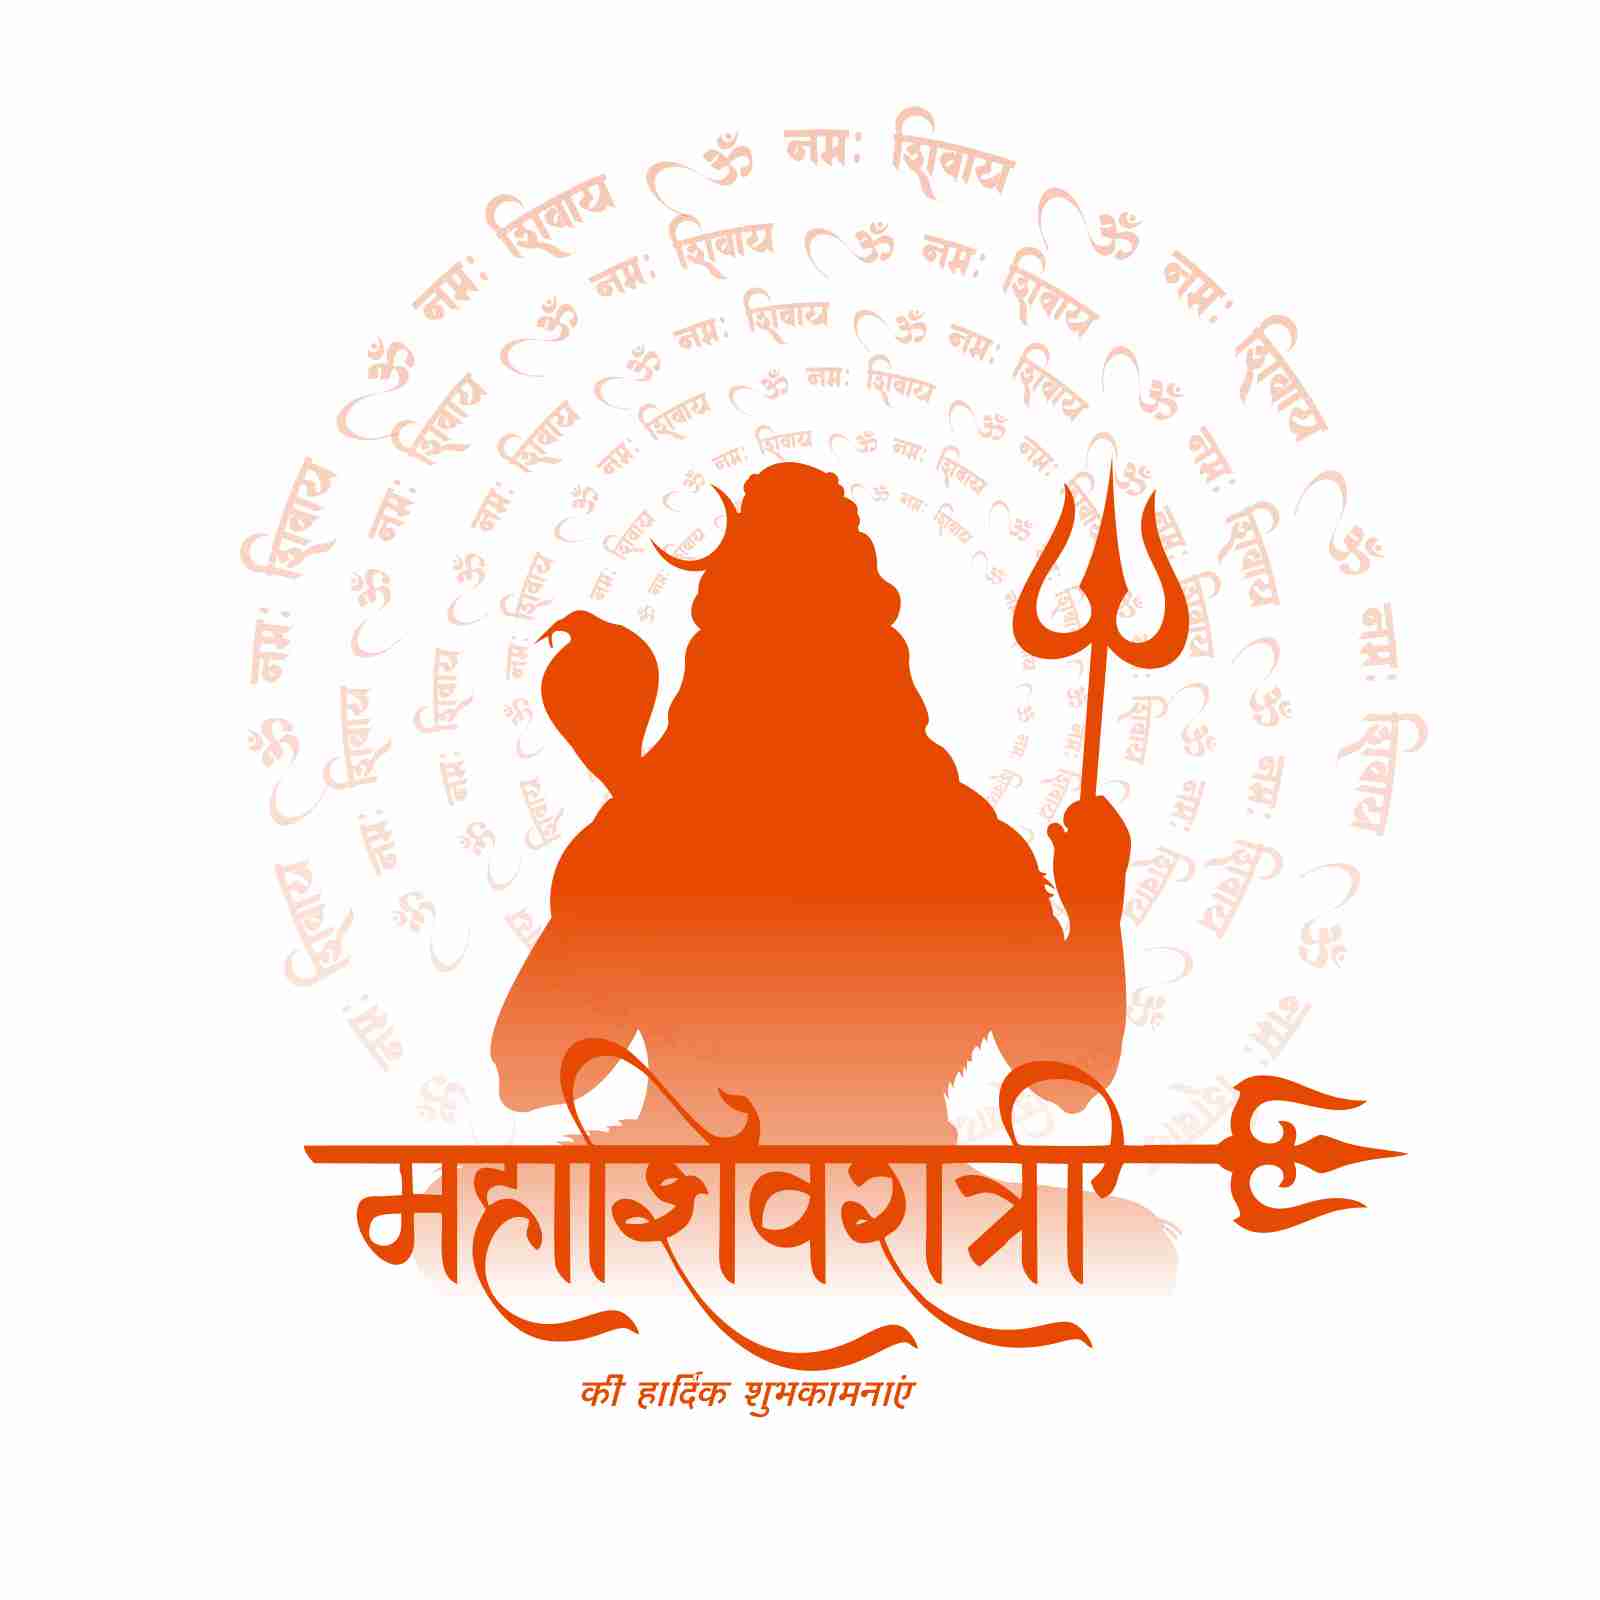 Premium Vector | Hinduism religion vector icon indian god lord shiva with  trishul sword and ancient hindu temple hinduism deity of meditation yoga  time and dance destruction and supreme being monochrome symbol